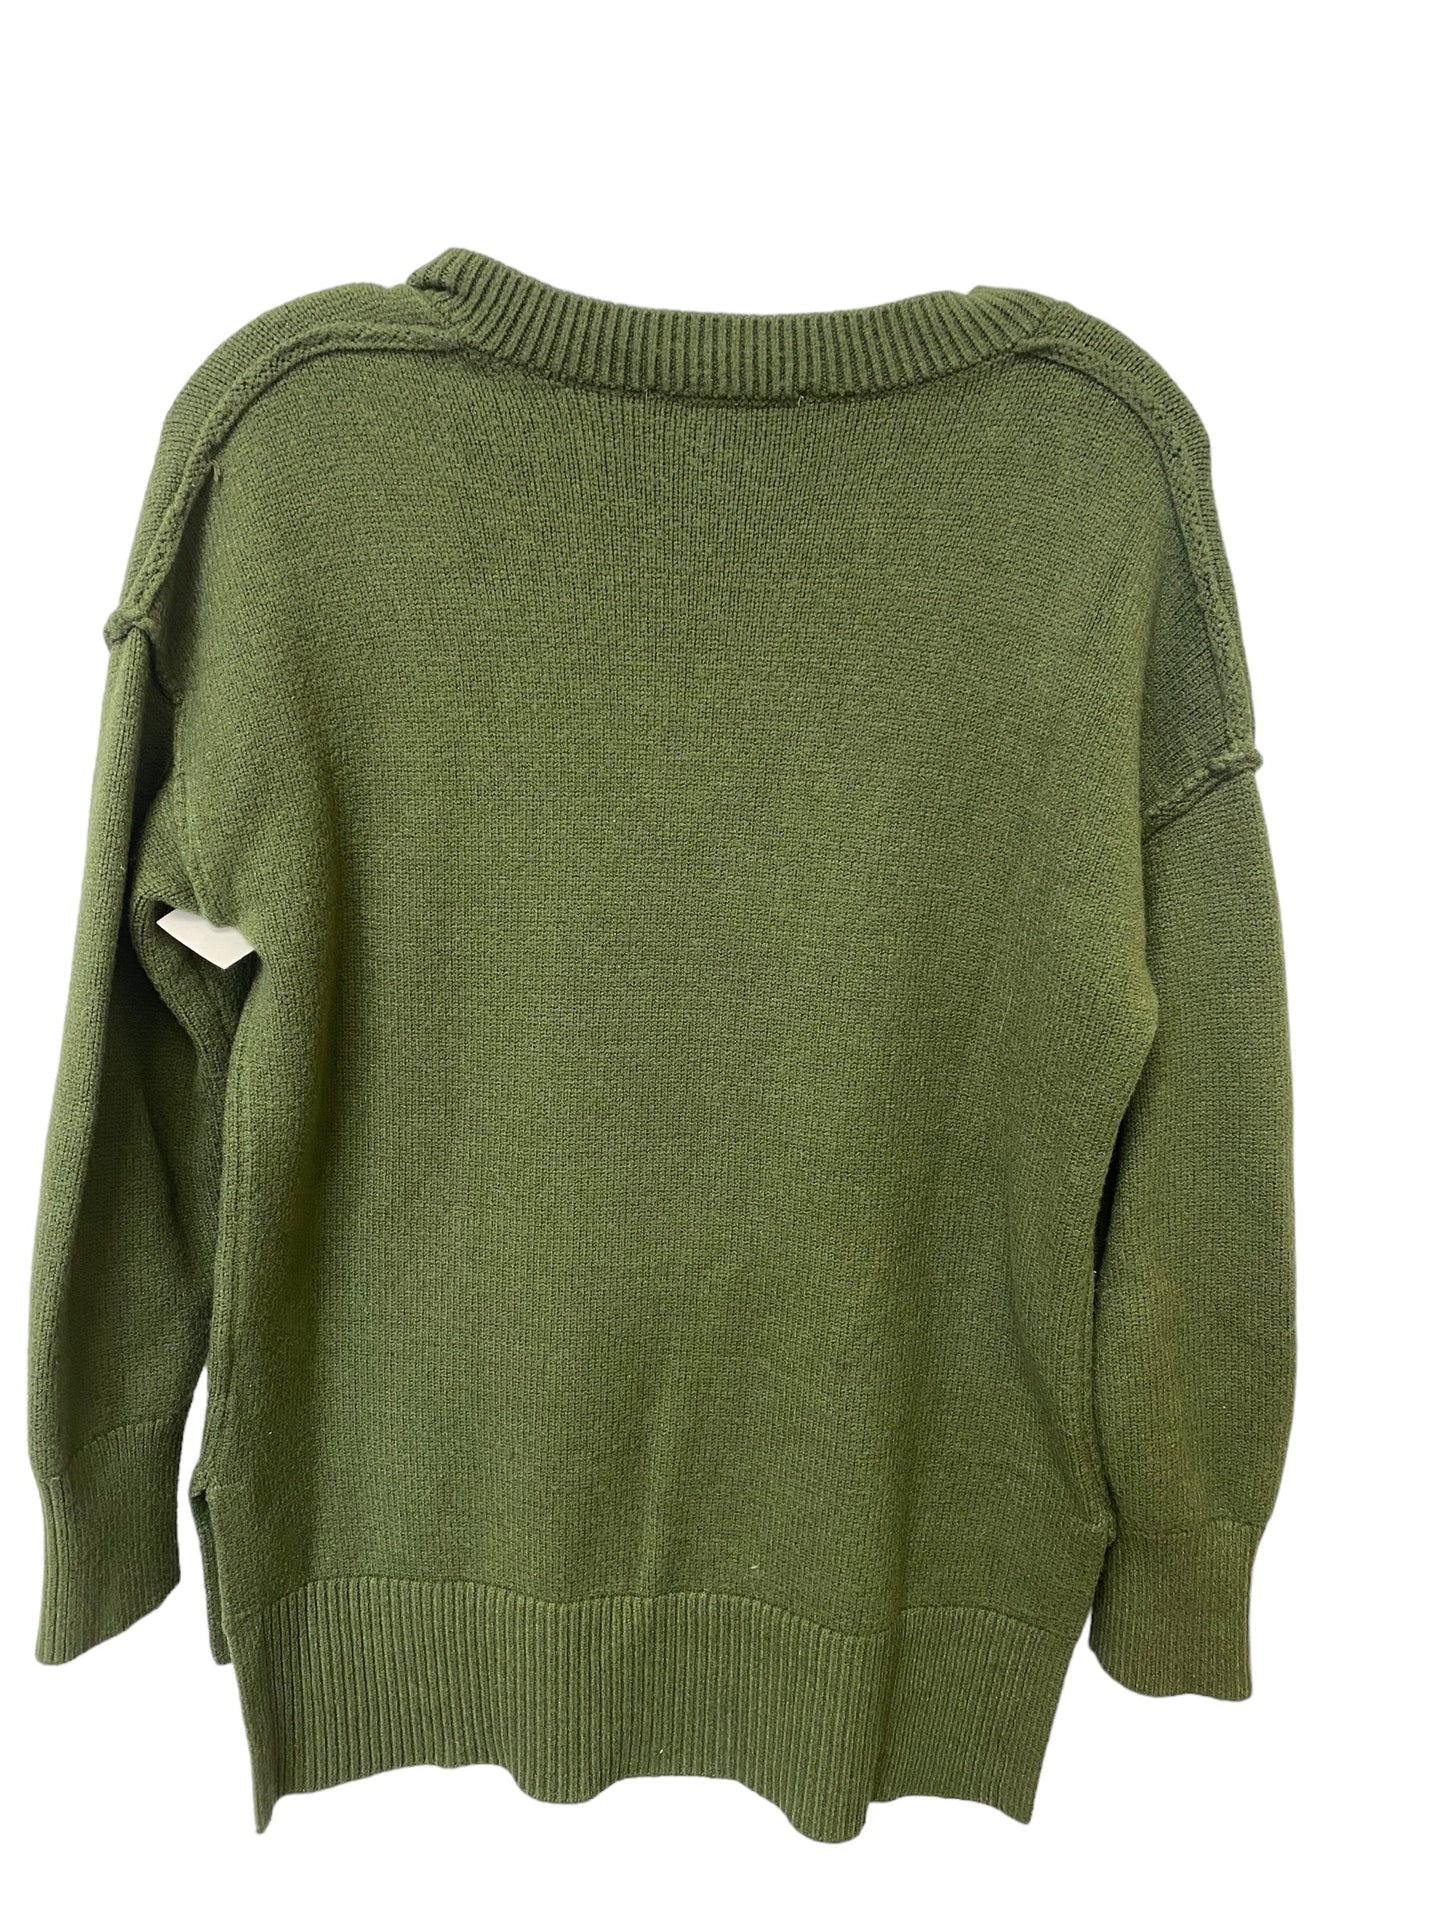 Green Sweater Philosophy, Size S